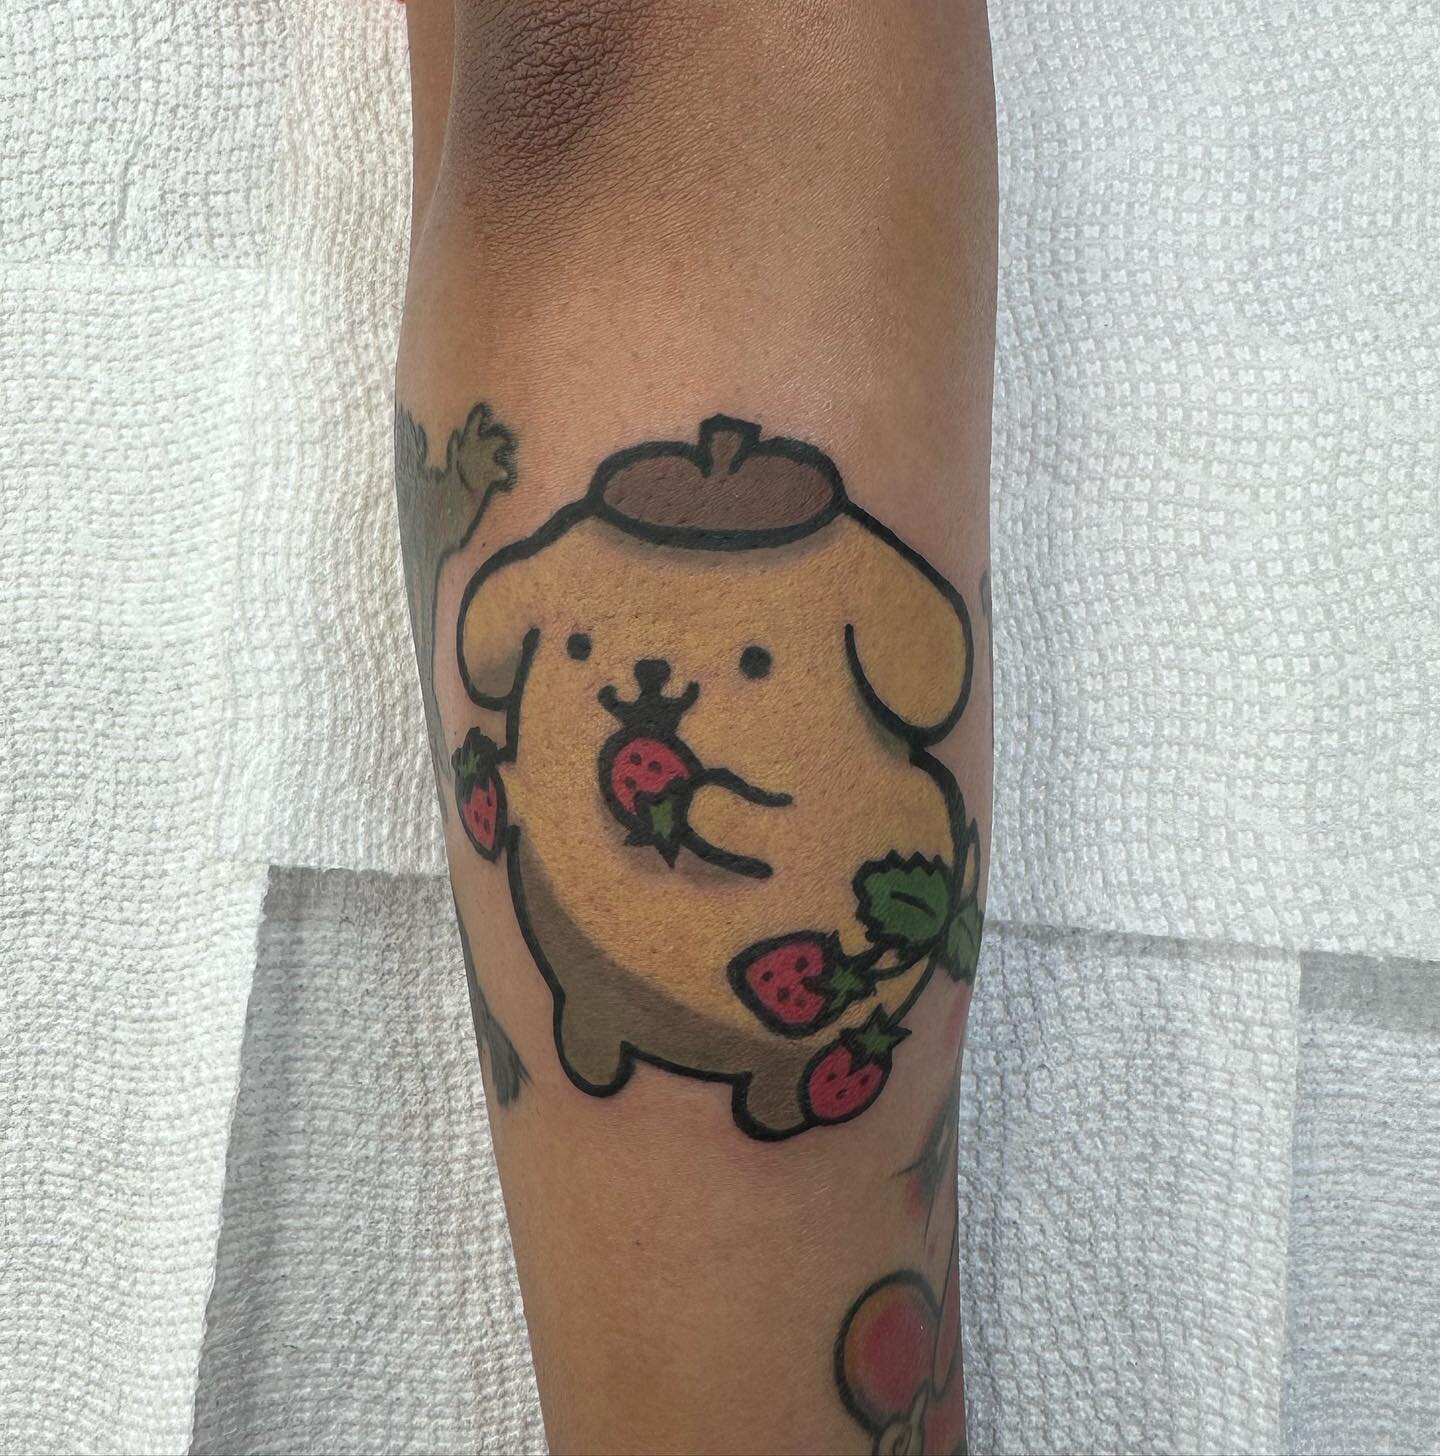 got to do this cute thicc boi on my lovely lady yesterday, would love to do some more color work, I&rsquo;m really open to anything just hit me up!
.
.
.
.
.
.
.
.
.
.
.
.
.
.
.
#sanrio #sanriocore #sanriocharacters #sanriojapan #sanriolover #sanriot